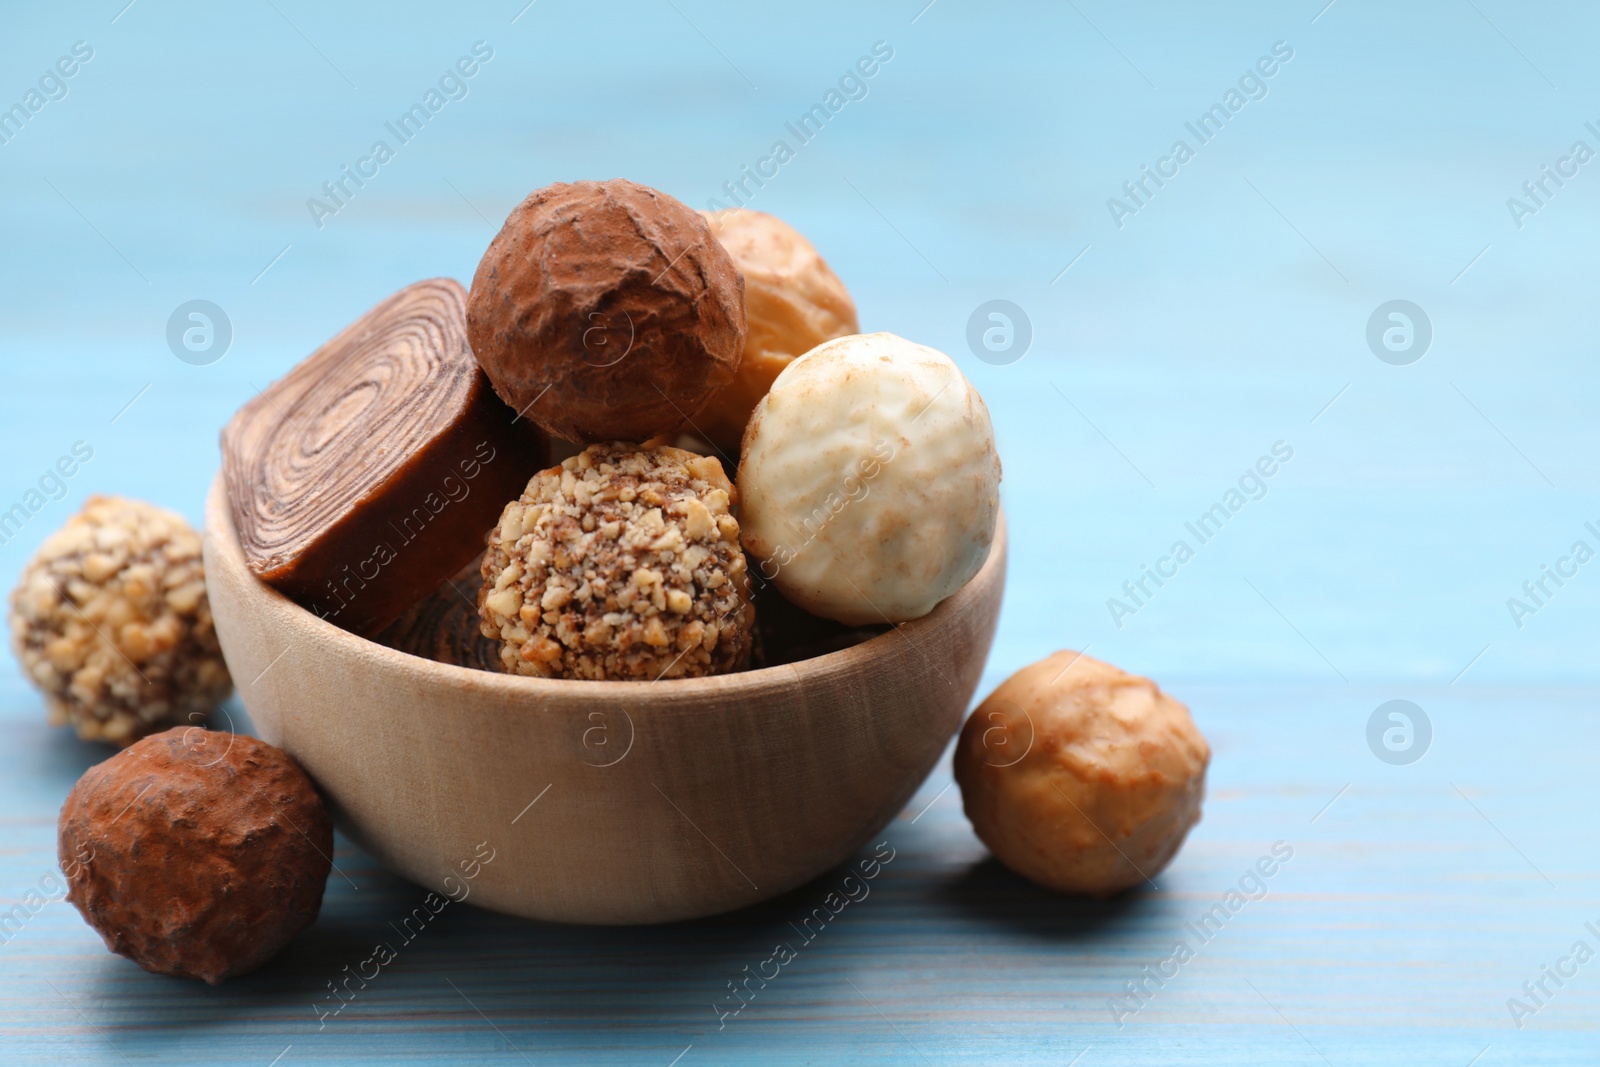 Photo of Tasty chocolate candies on light blue wooden table